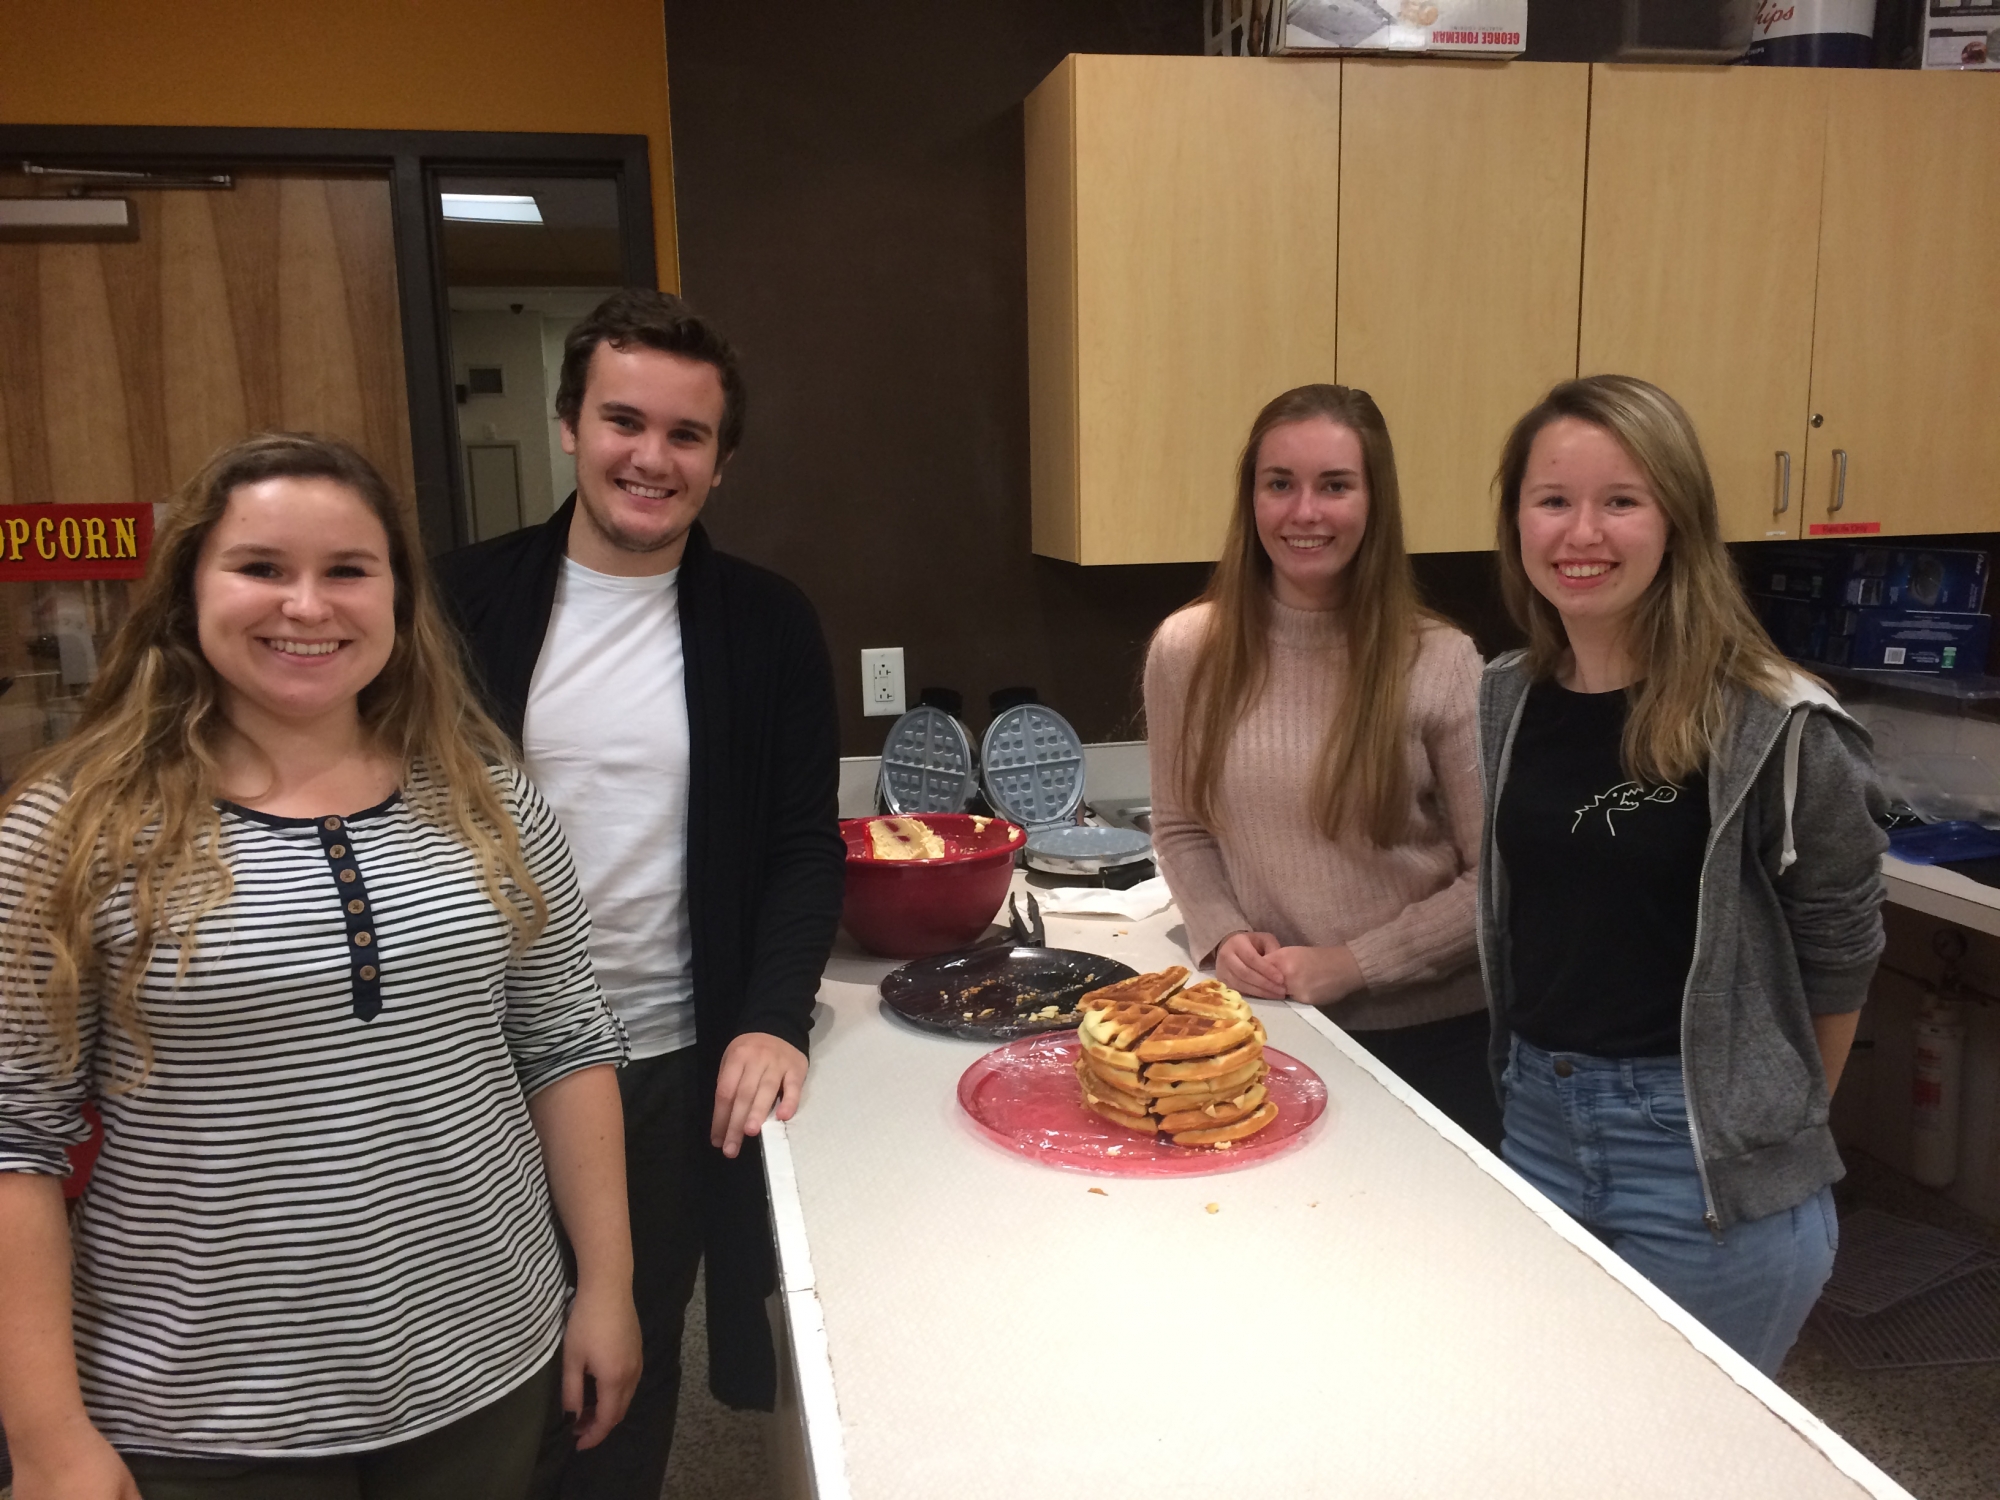 Belgian students Elise Grymonprez, Tijs Toulouse, Eline Vercaemer, Tessa Gesquire prepare delicious waffles based on a recipe from their home country.